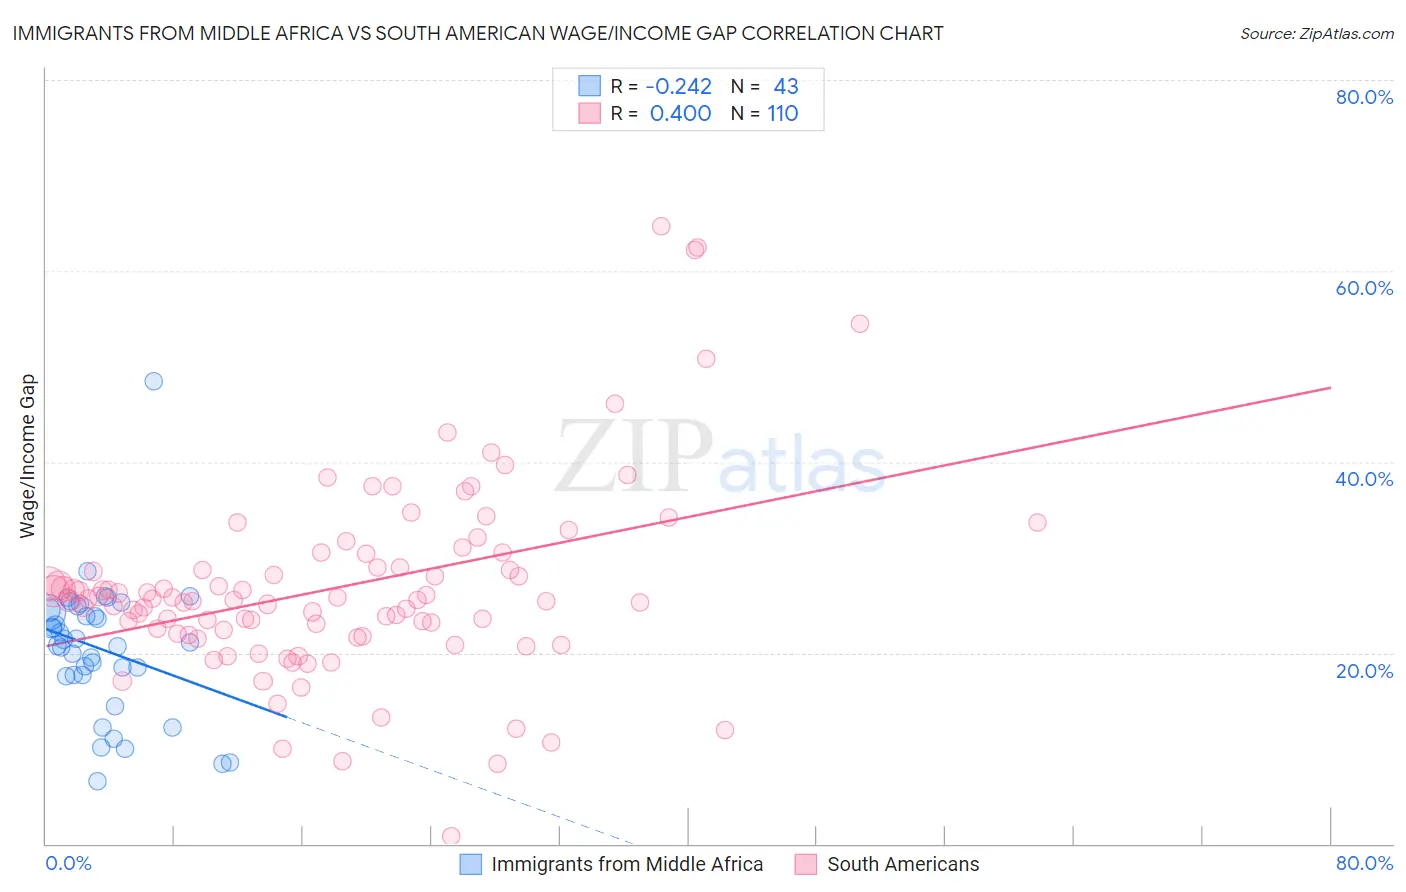 Immigrants from Middle Africa vs South American Wage/Income Gap